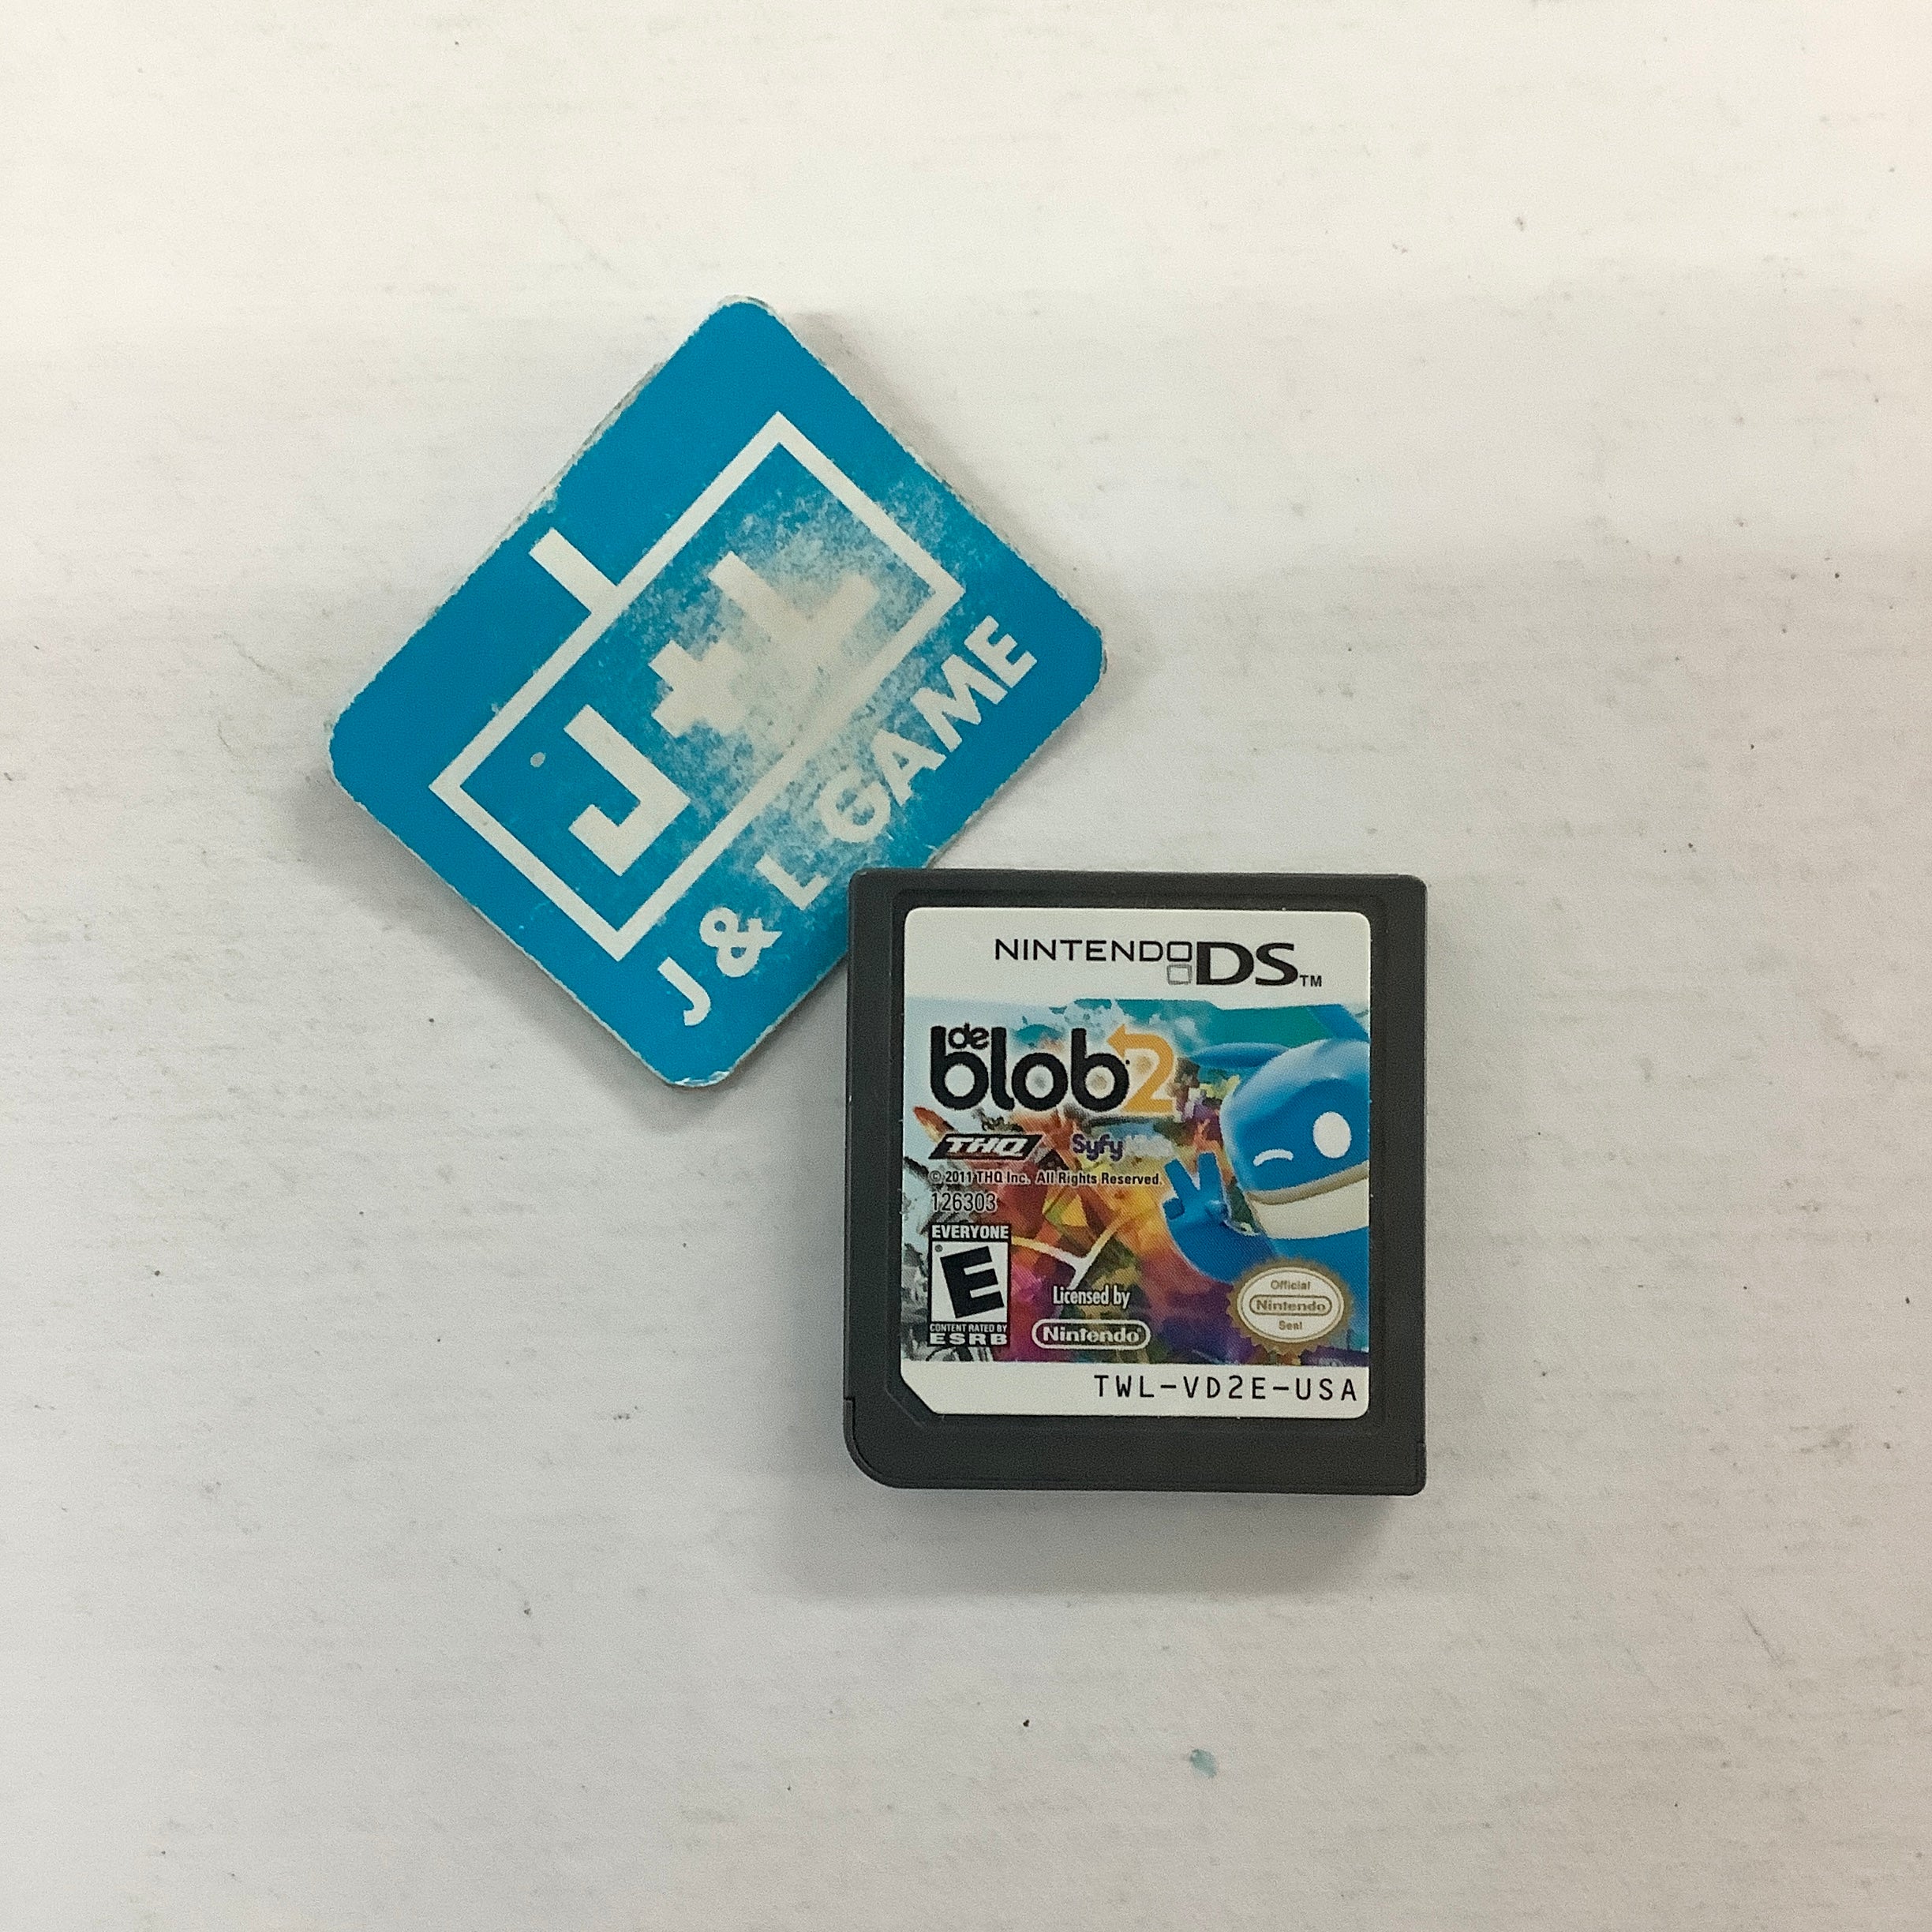 de Blob 2 - (NDS) Nintendo DS [Pre-Owned] Video Games THQ   